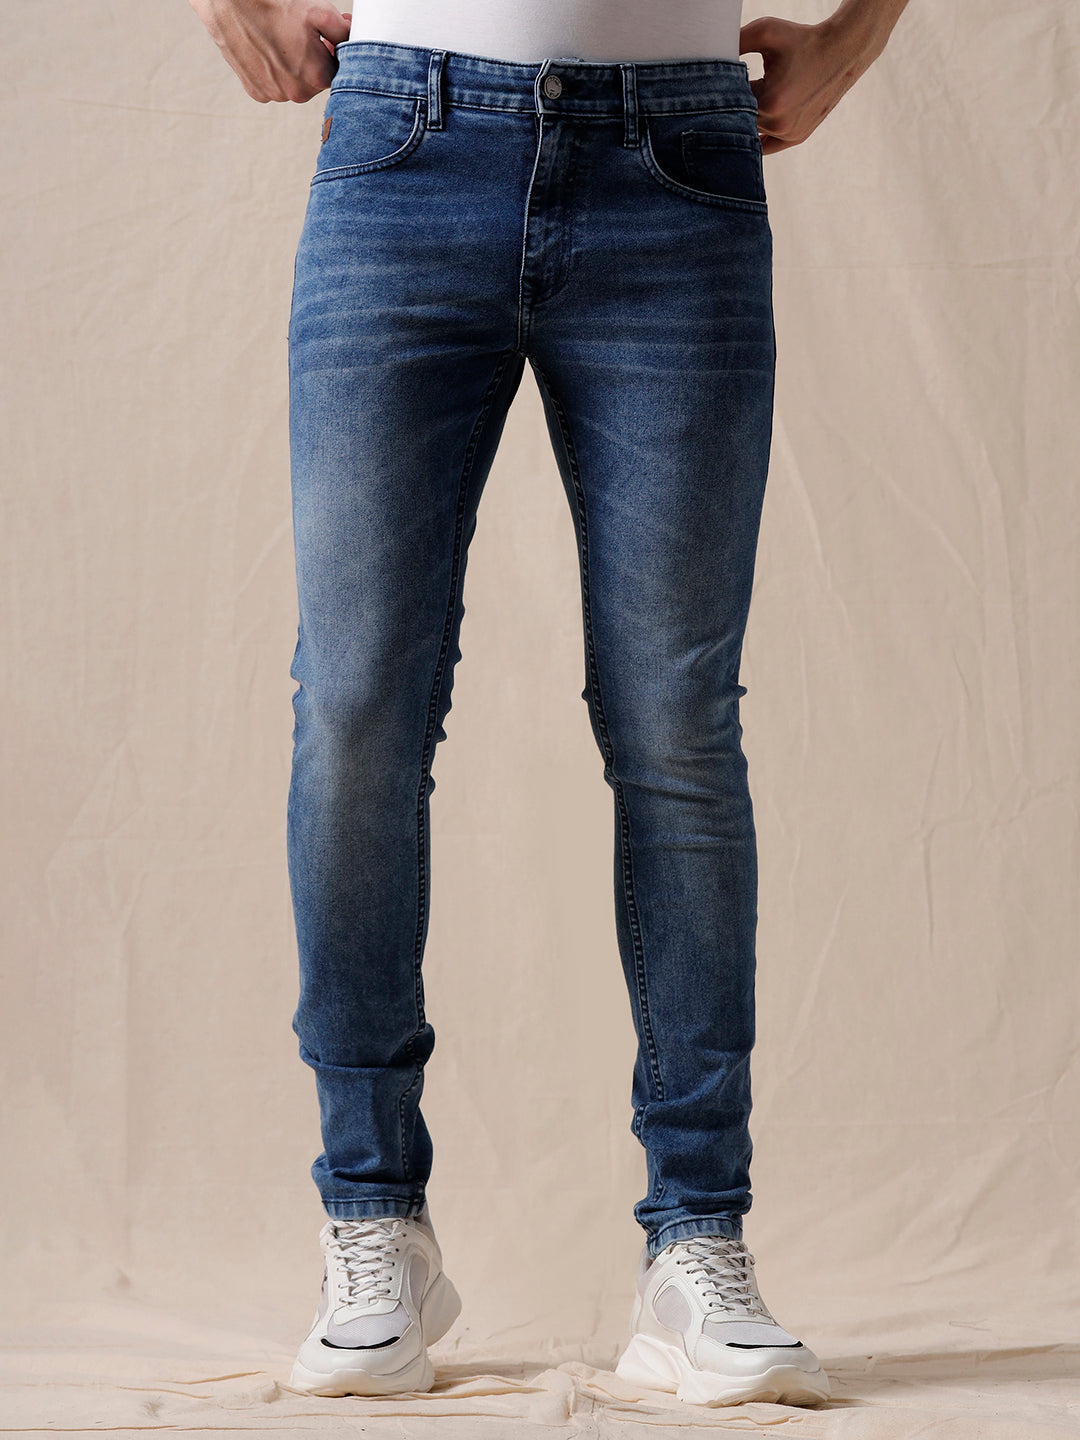 Light Tone Washed Jeans